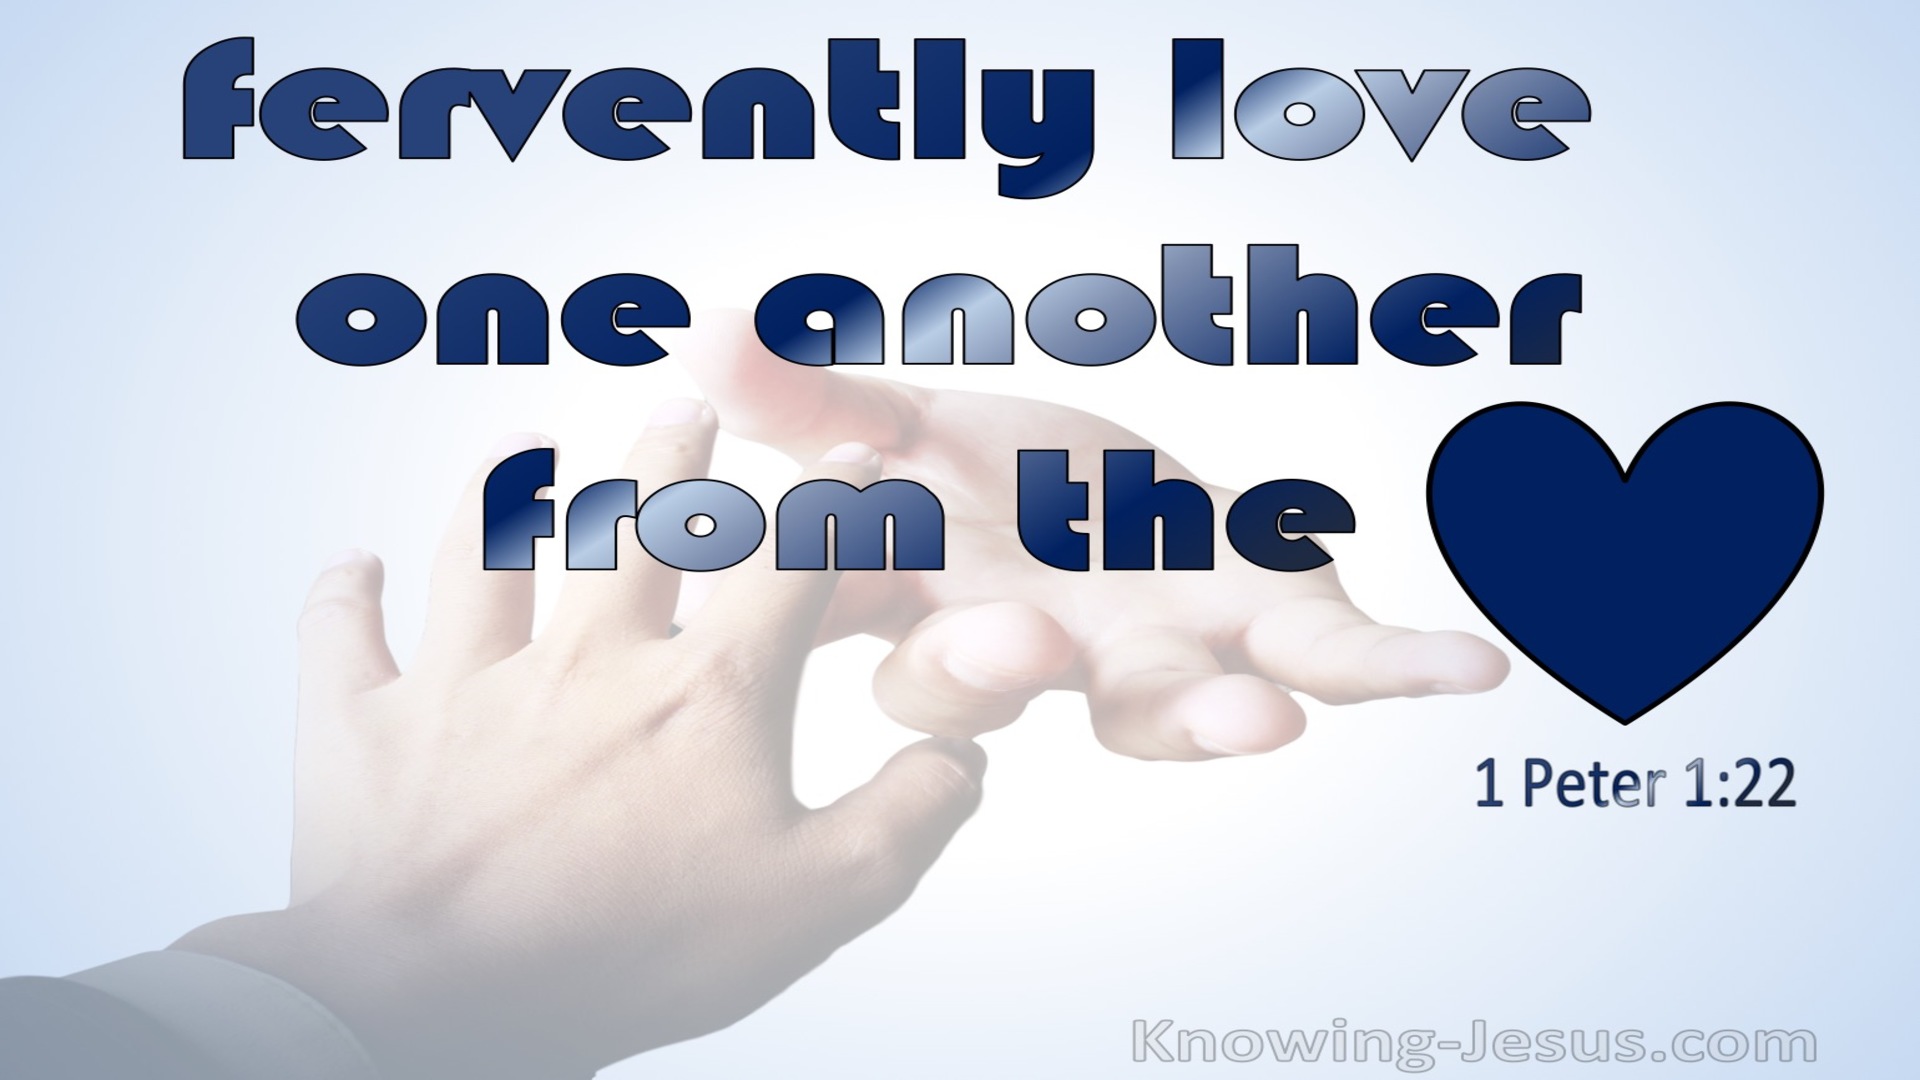 1 Peter 1:22 Fervently Love One Another From The Heart (blue)